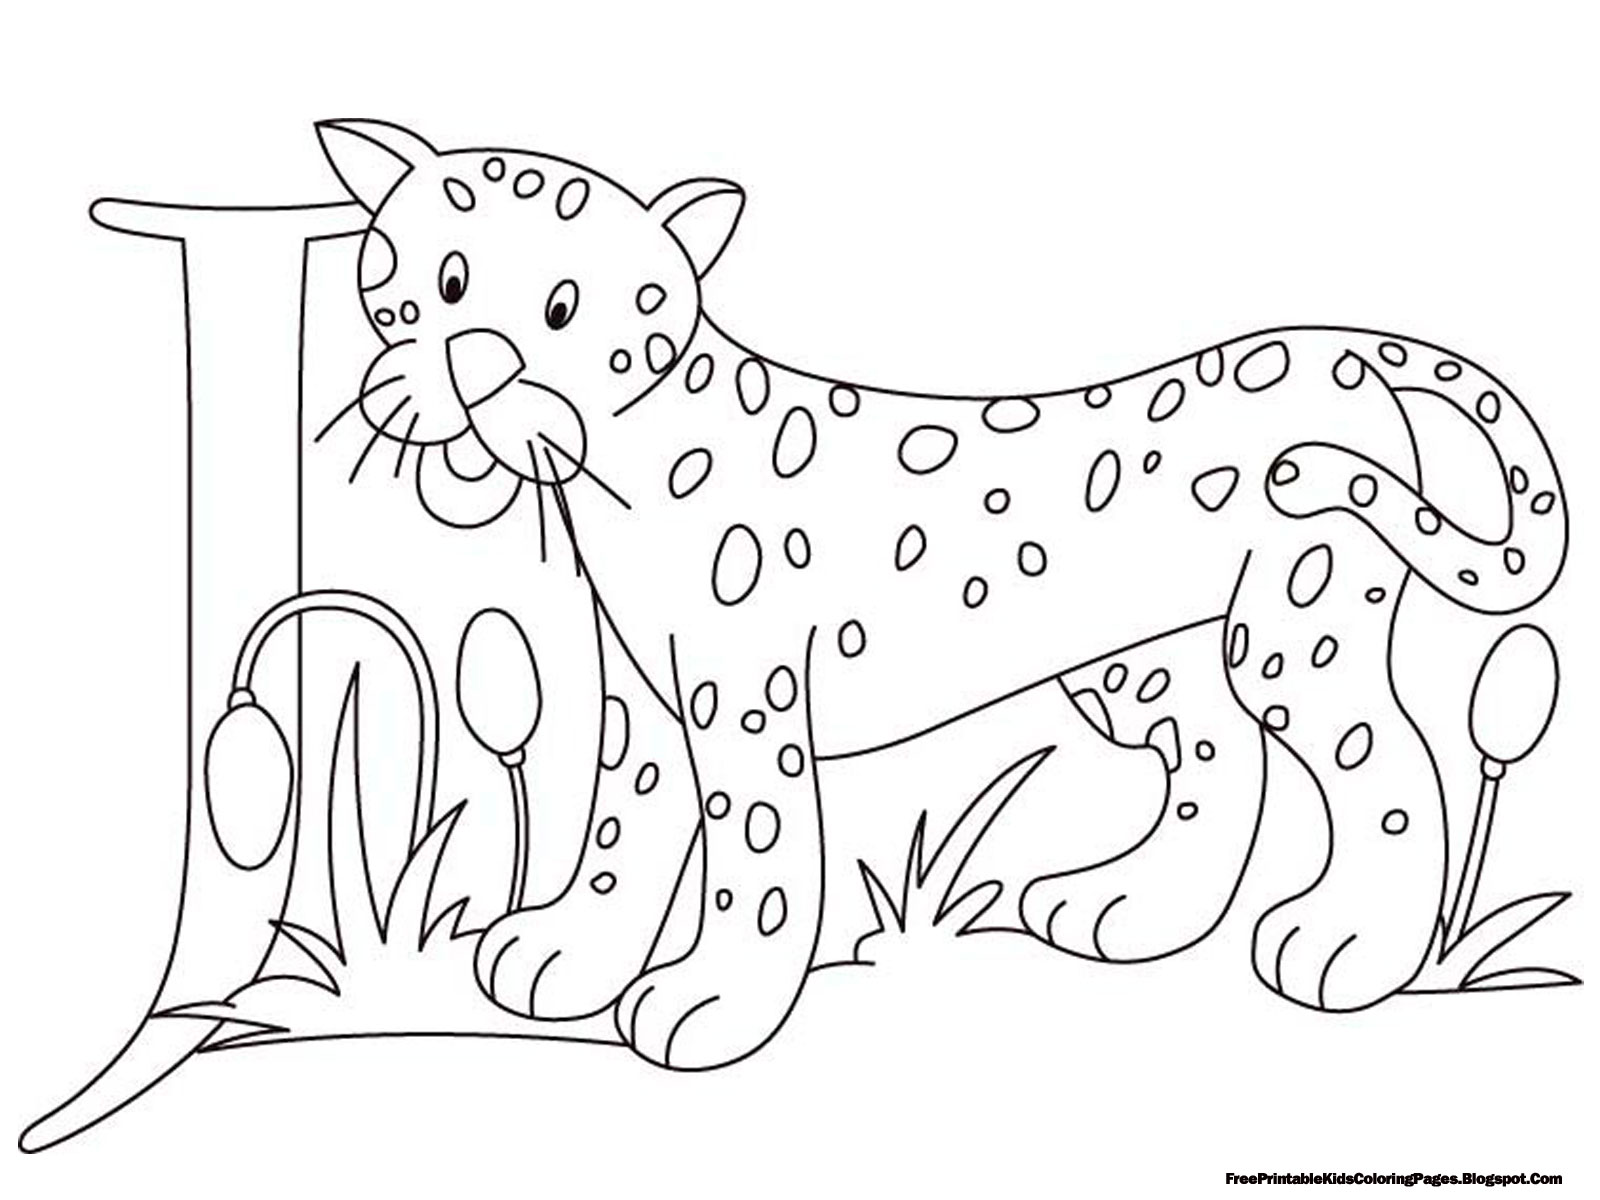  Alphabet Coloring Pages Printable  Free Printable Kids Coloring Pages